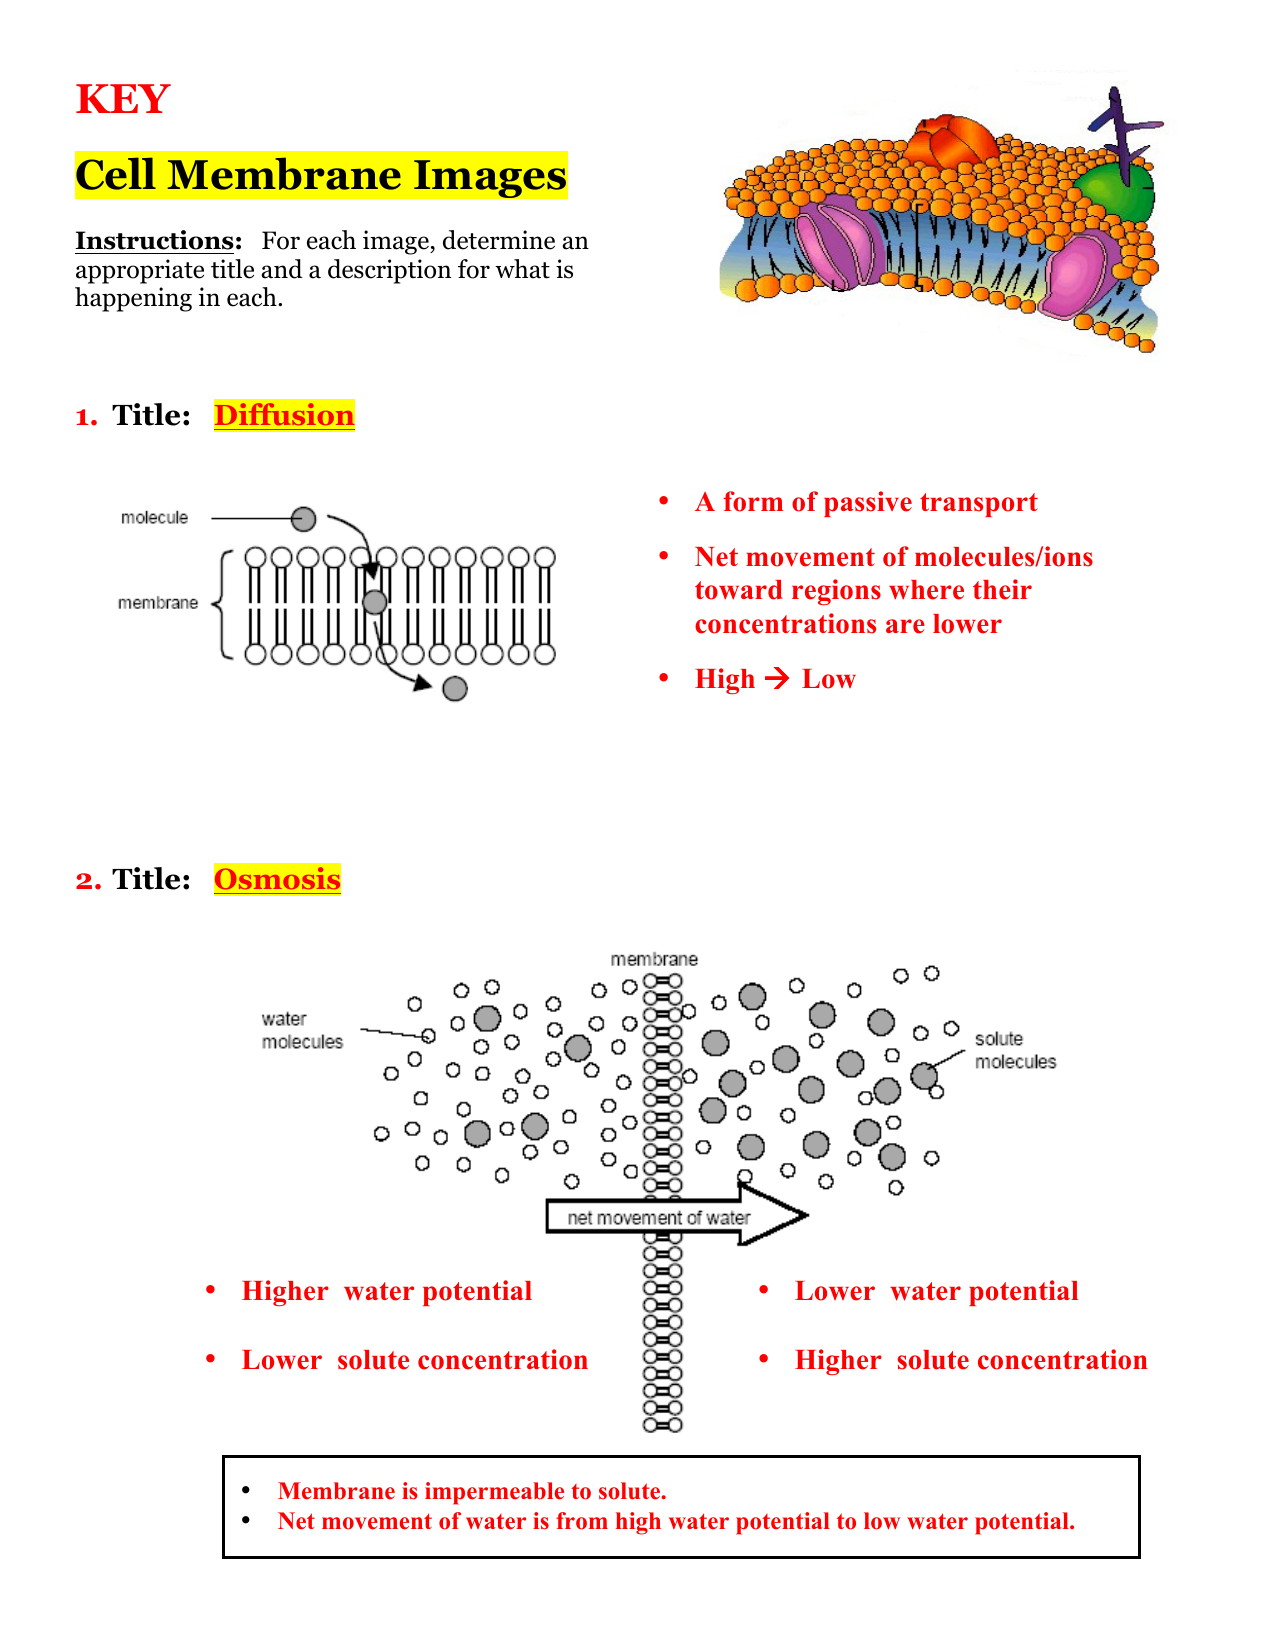 KEY Cell Membrane Images Intended For Cell Membrane Images Worksheet Answers